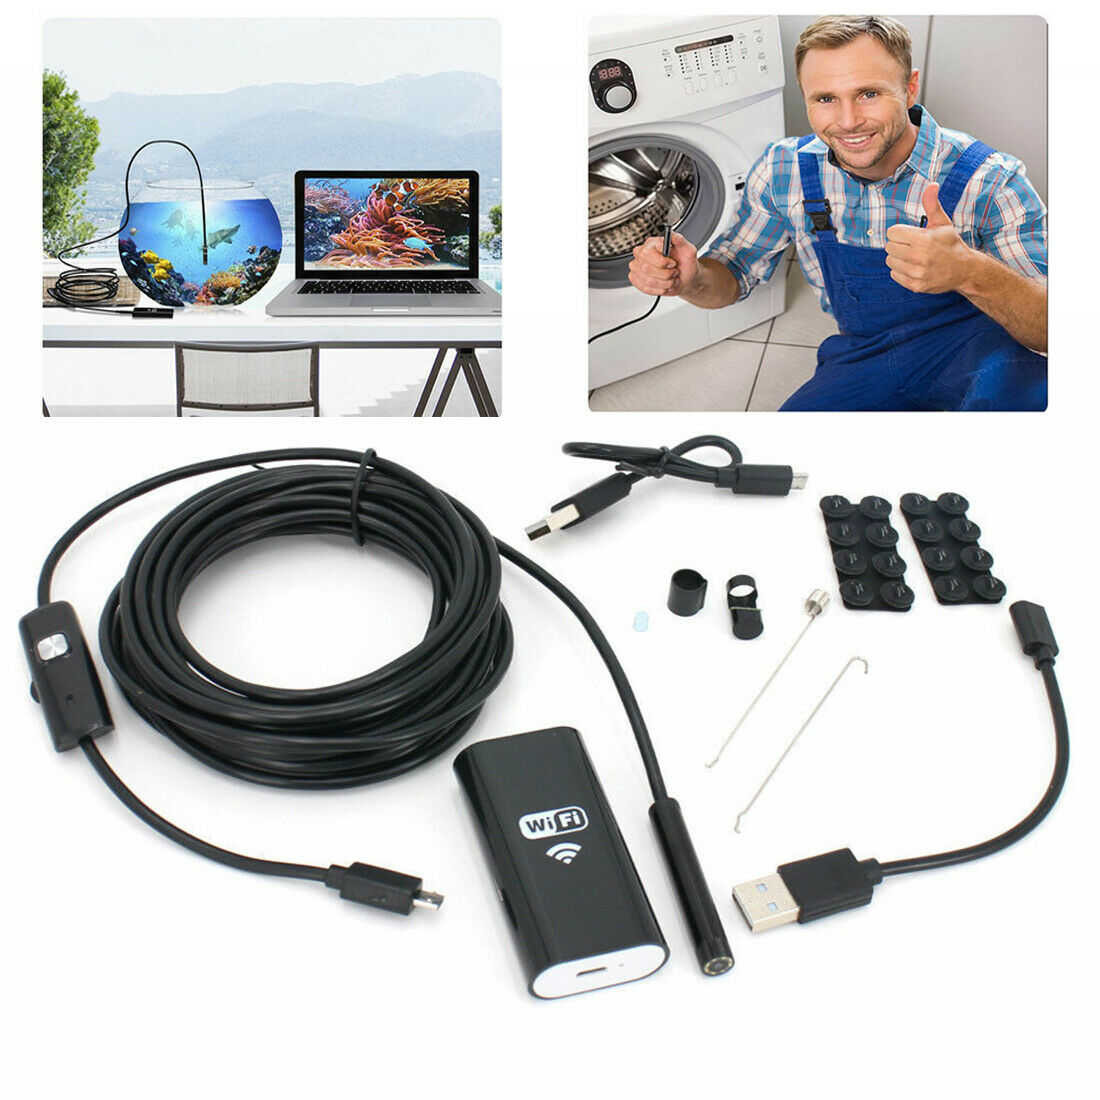 5m 8led Wifi Borescope Endoscope Snake Inspection Camera For Iphone Android Ios